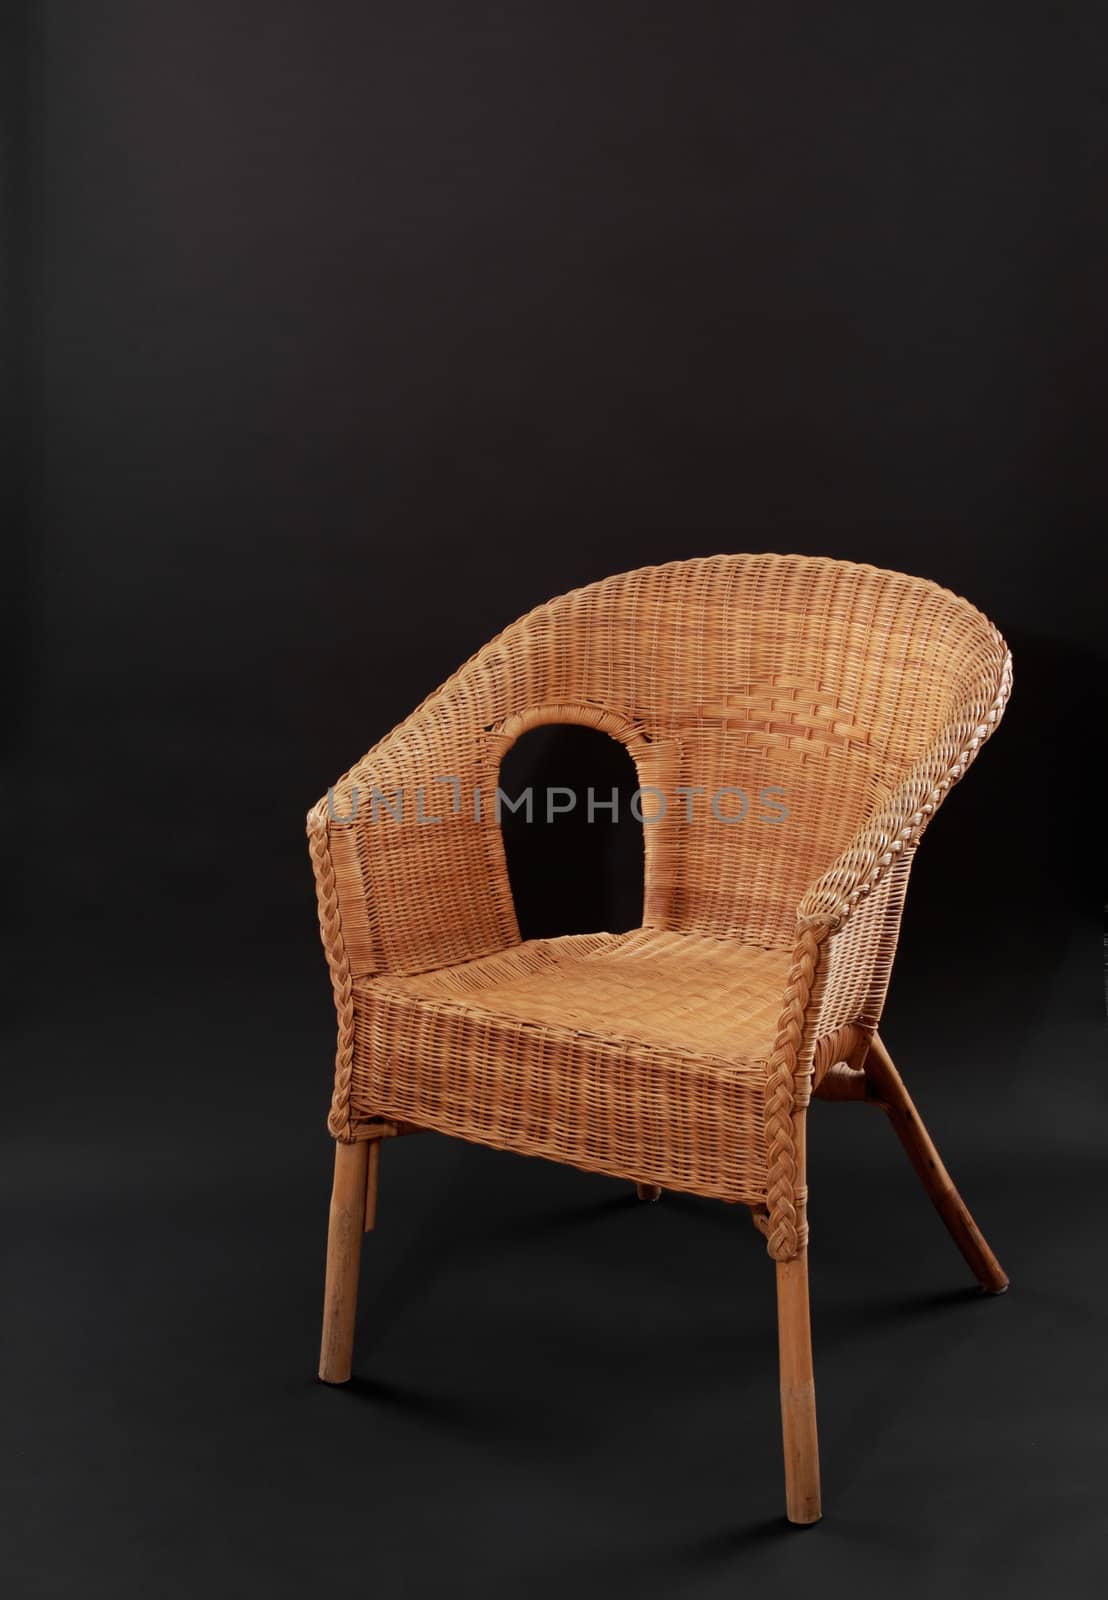 wicker chair by lanalanglois